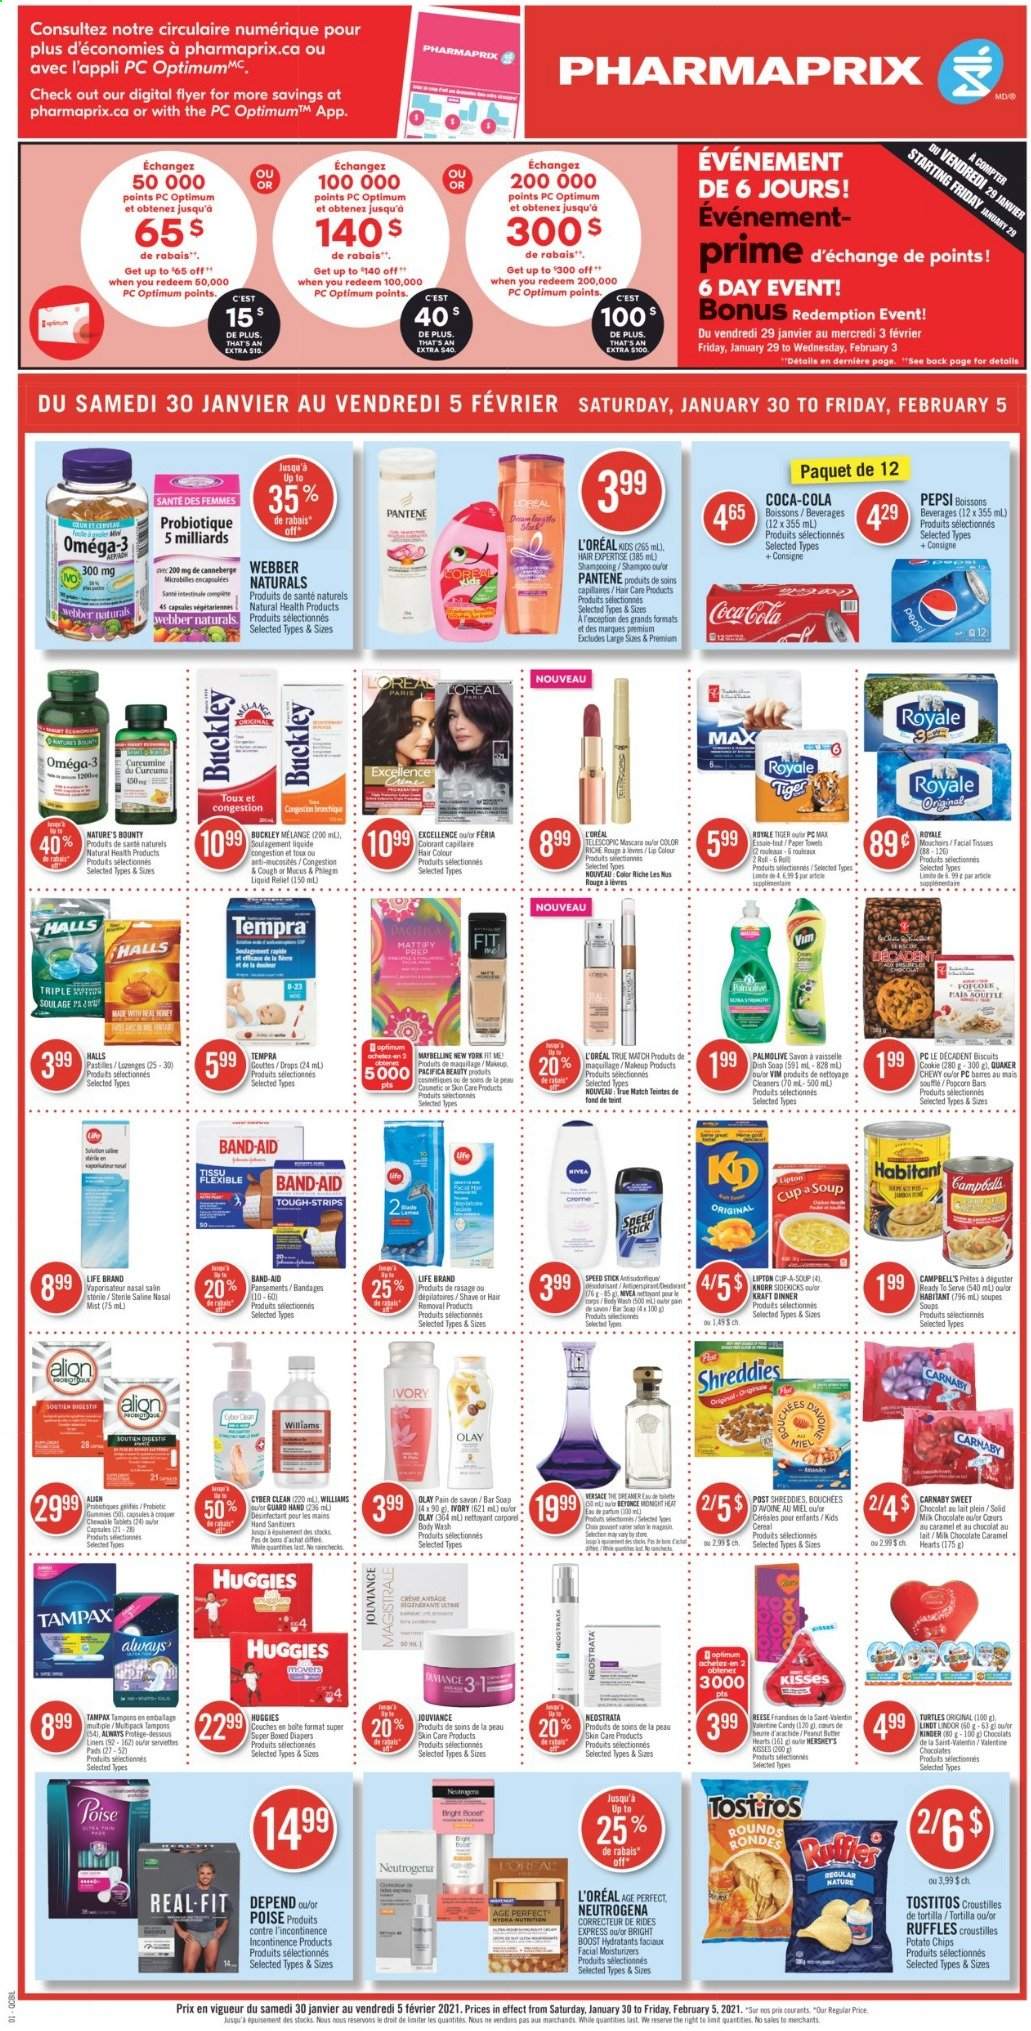 thumbnail - Pharmaprix Flyer - January 30, 2021 - February 05, 2021 - Sales products - tortillas, Campbell's, soup, Quaker, Kraft®, Hershey's, strips, Halls, chocolate, biscuit, potato chips, popcorn, Ruffles, Tostitos, cereals, caramel, Coca-Cola, Pepsi, Boost, nappies, tissues, body wash, Palmolive, soap bar, soap, tampons, facial tissues, L’Oréal, moisturizer, Olay, Speed Stick, hair removal, makeup, pan, paper, Nature's Bounty, Omega-3, Knorr, mascara, Maybelline, Neutrogena, Tampax, Versace, Huggies, Pantene, chips. Page 1.